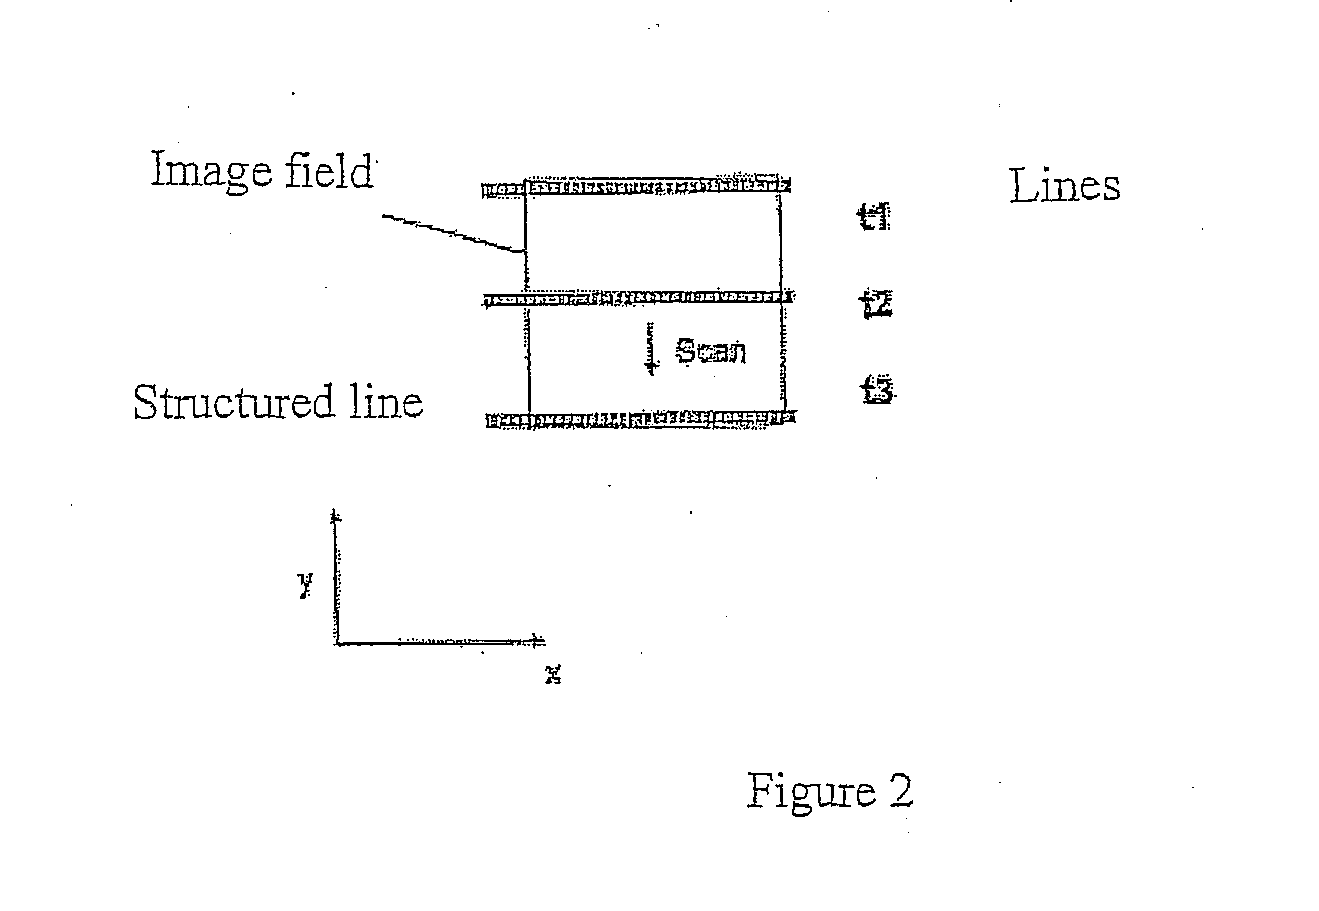 Method and Configuration for Depth Resolved Optical Detection of an Illuminated Specimen